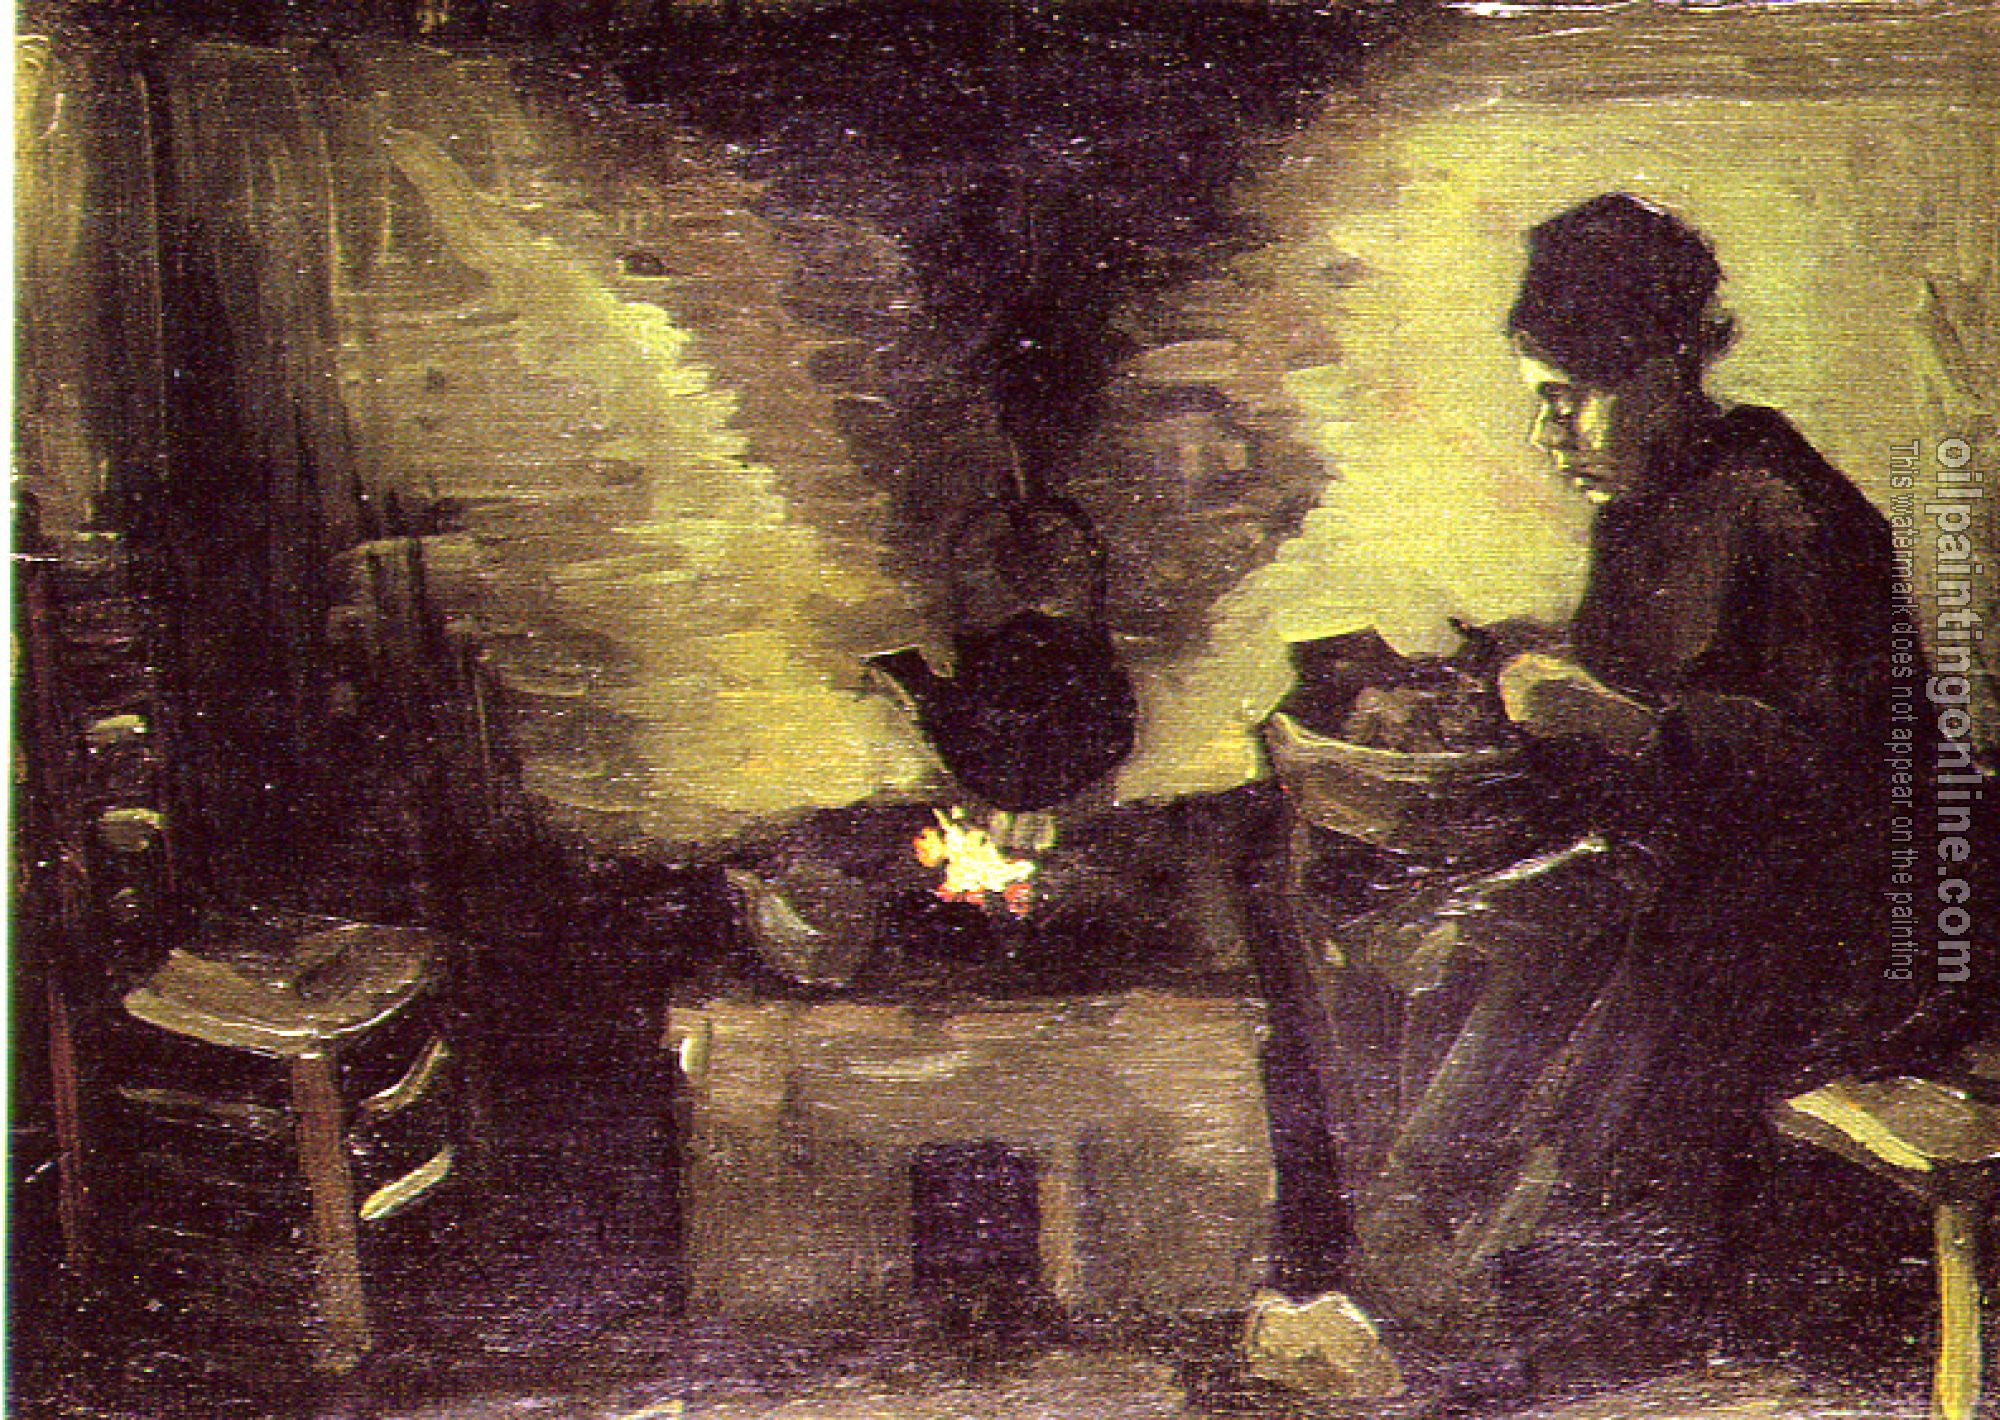 Gogh, Vincent van - Peasant woman,Sitting by the Fire